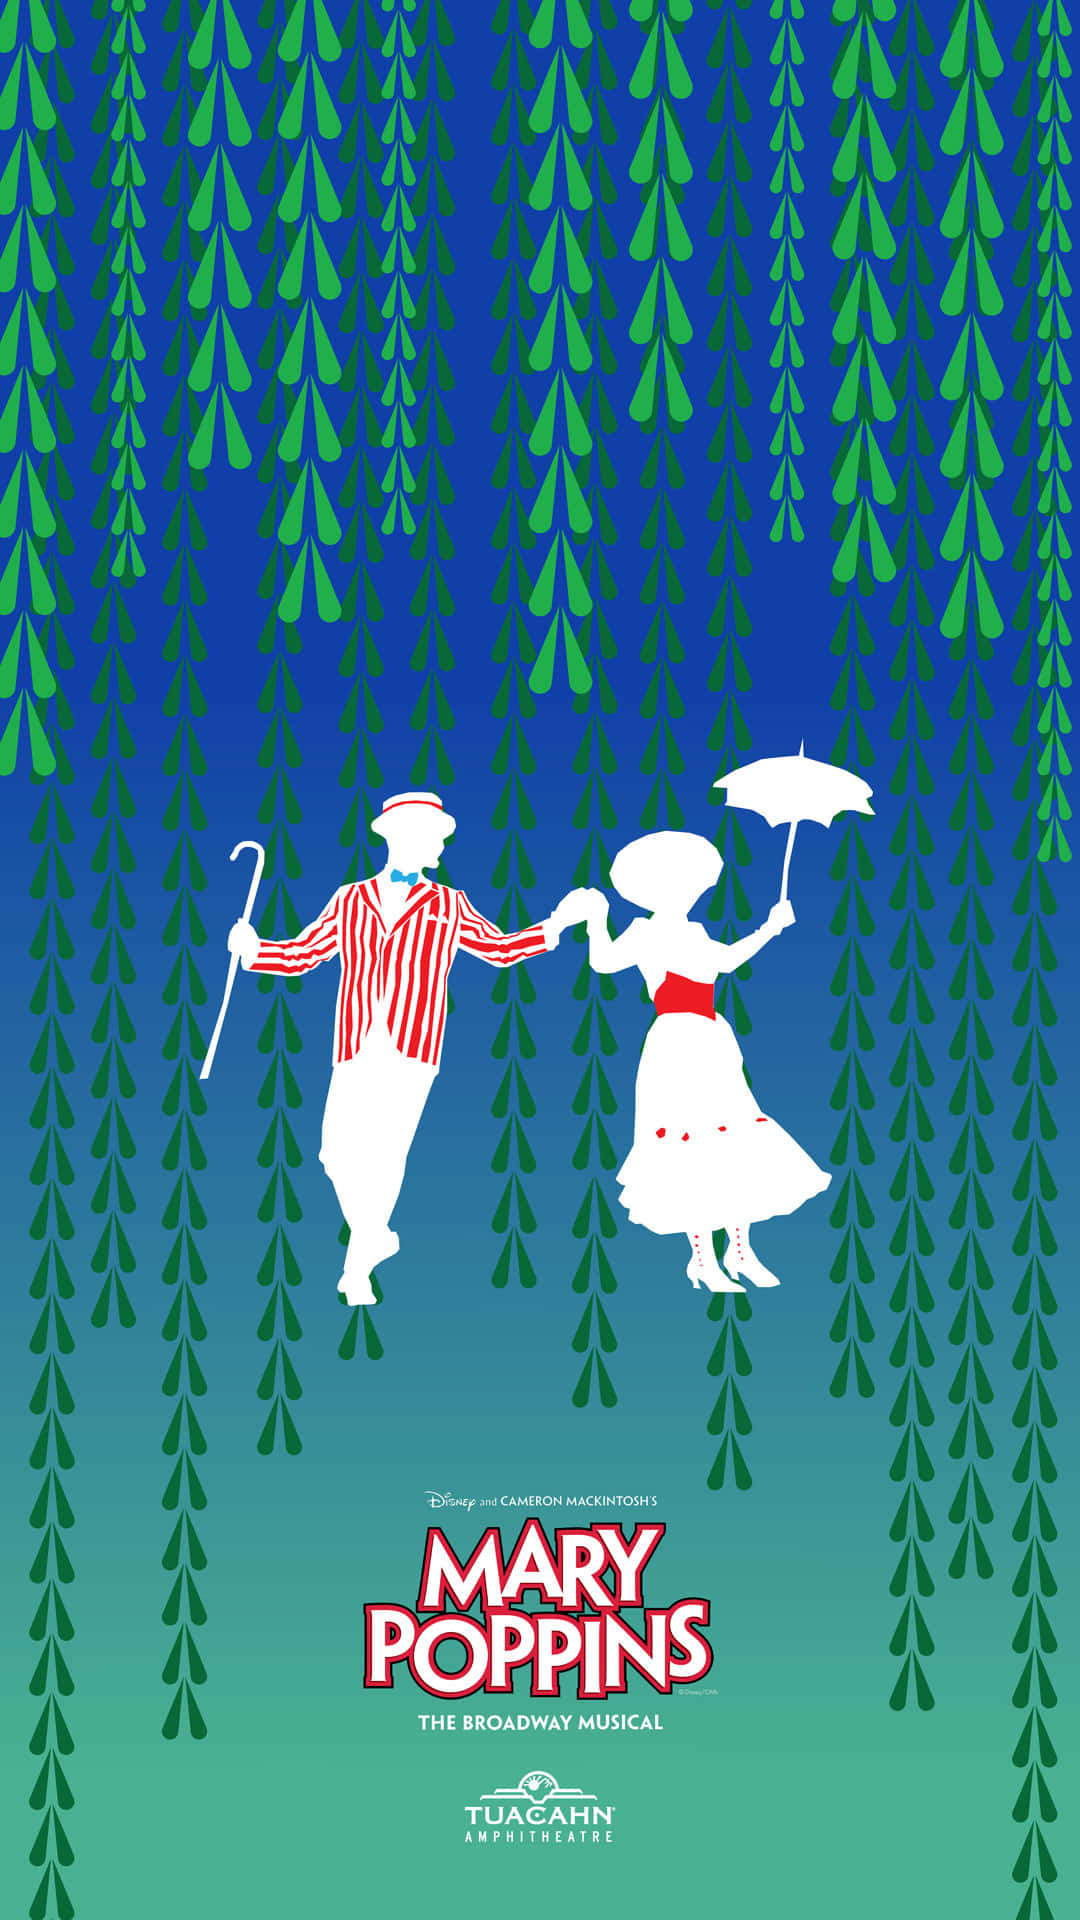 Mary Poppins Displayed In A Vibrant And Colorful Image Background